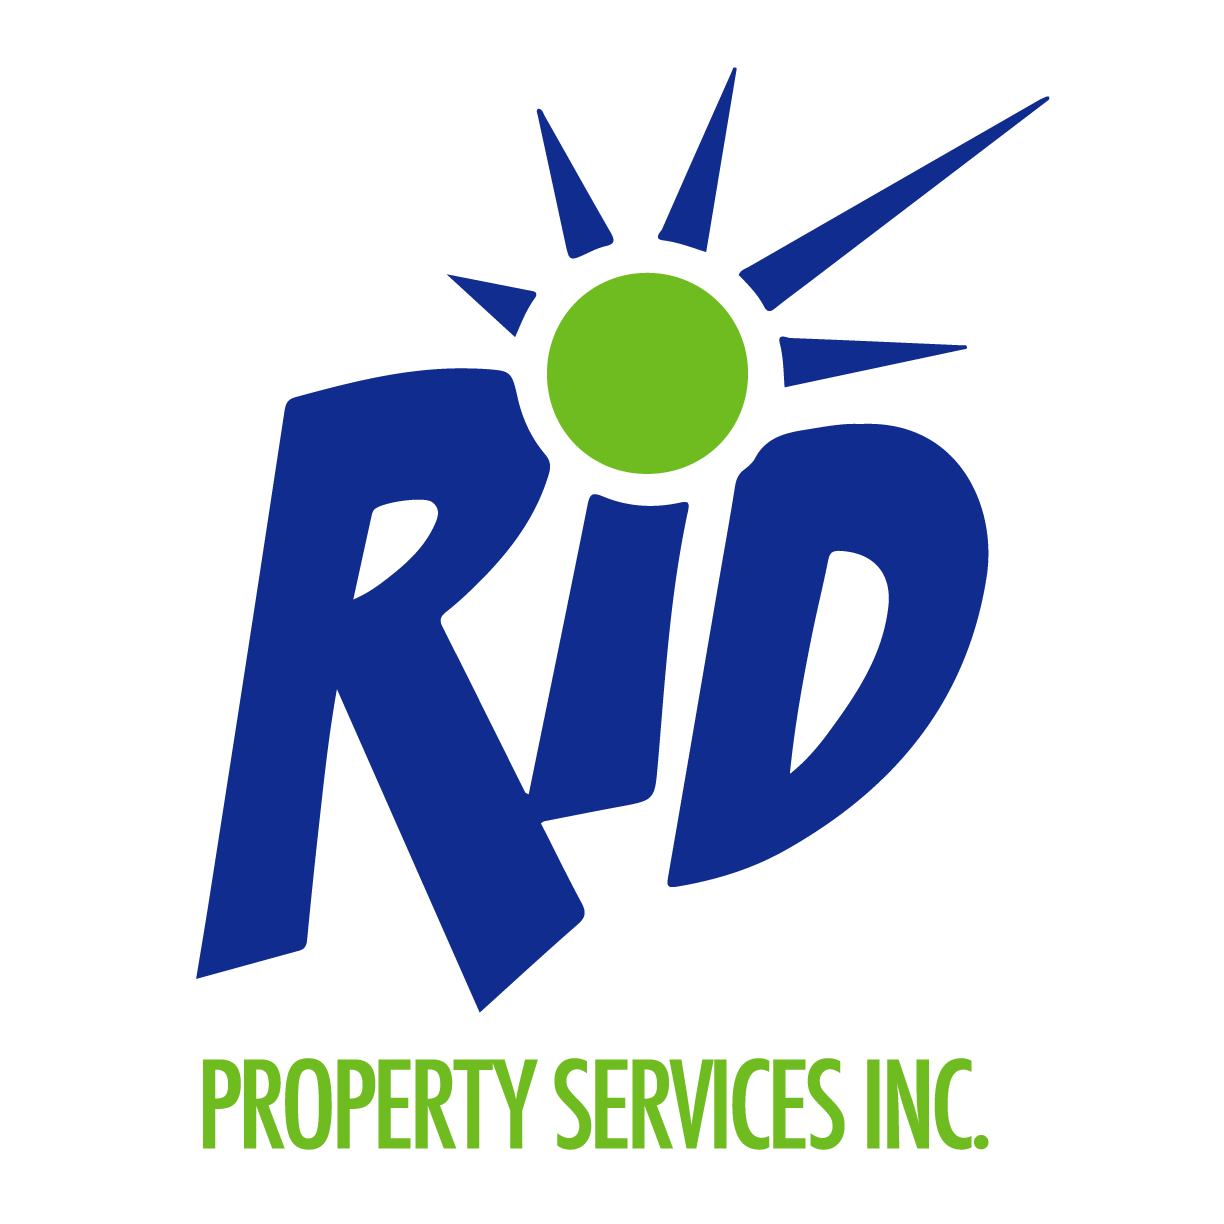 Rid Property Services